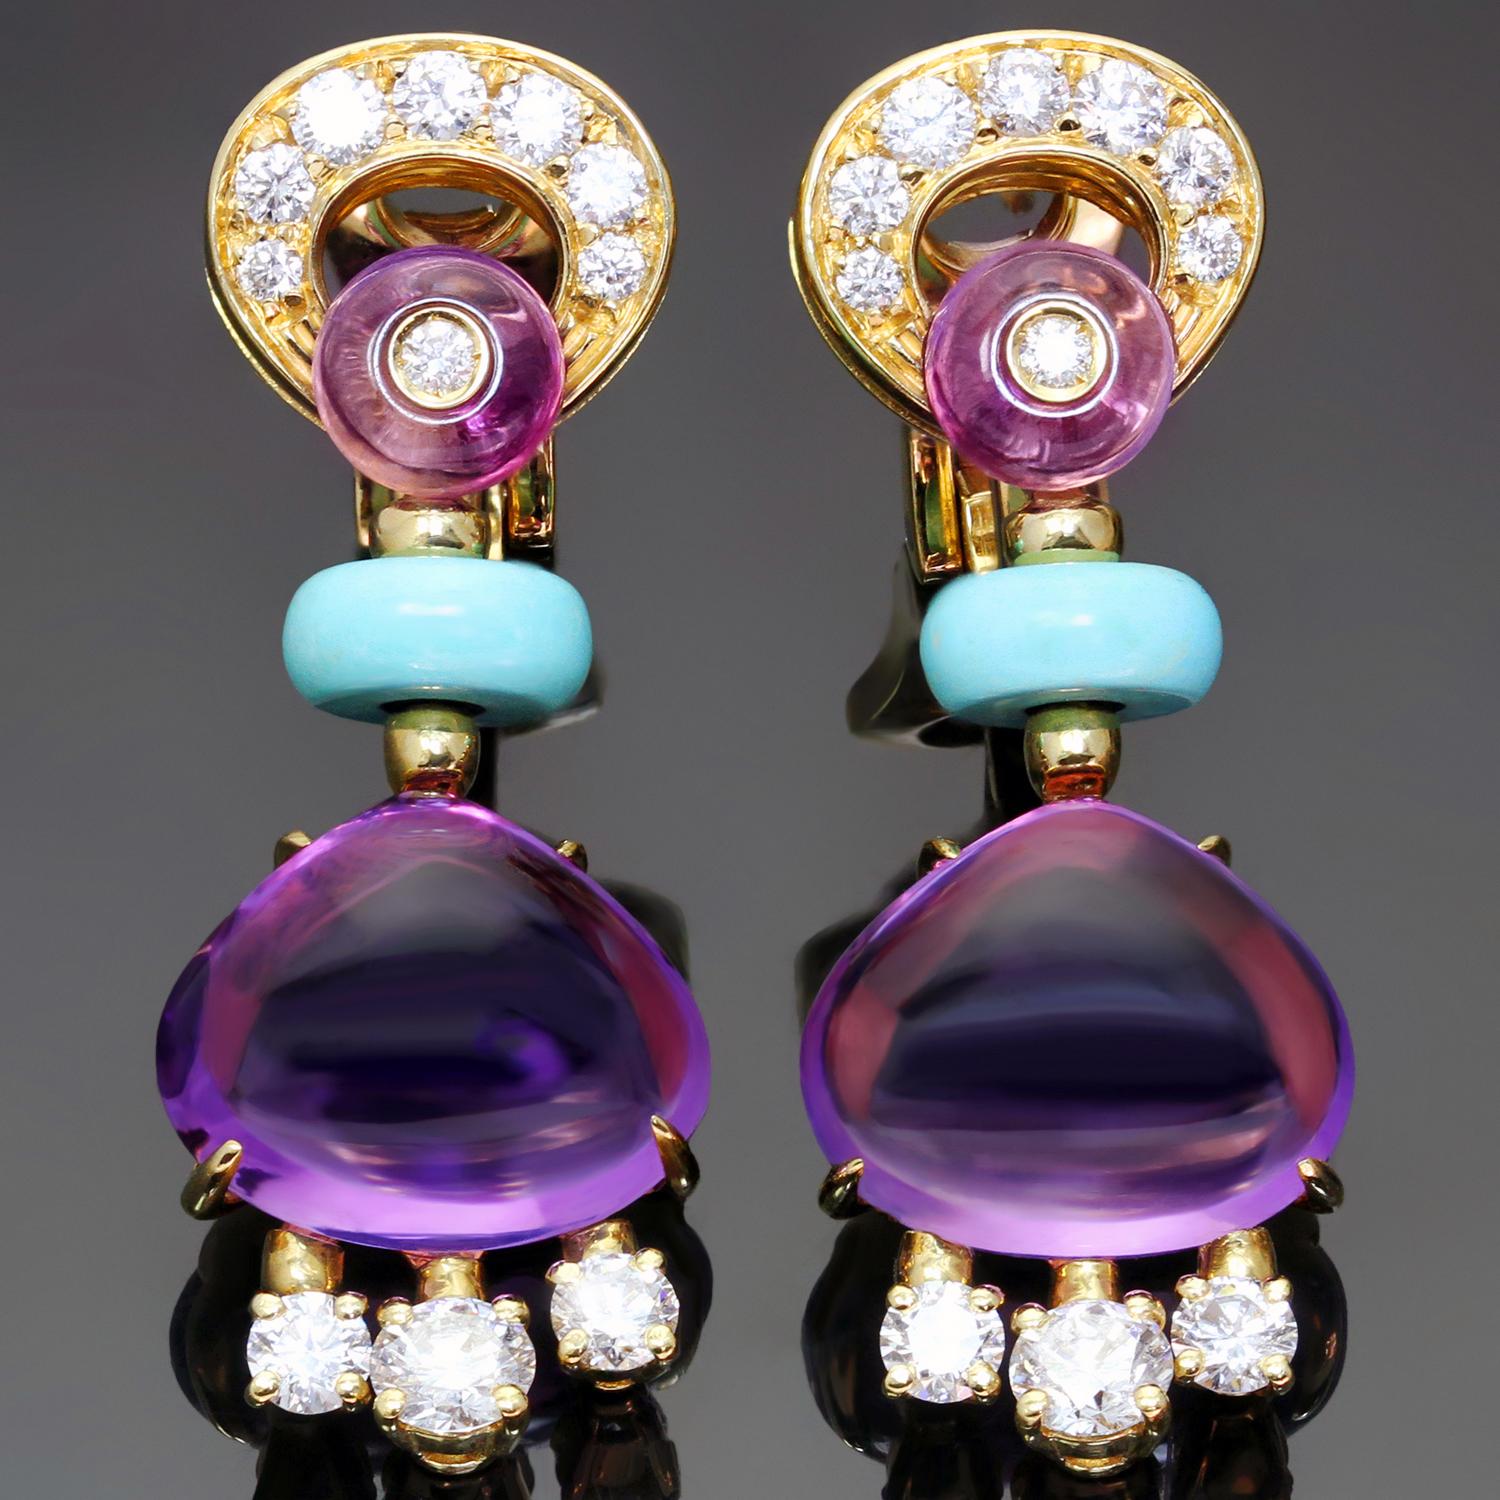 These splending earrings from Bulgari's vibrant Mediterranean Eden collection are crafted in 18k yellow gold and beautifully set with cabochon amethyst, turquoise, and brilliant-cut round E-F VVS1-VVS2 diamonds weighing an estimated 1.12 carats.